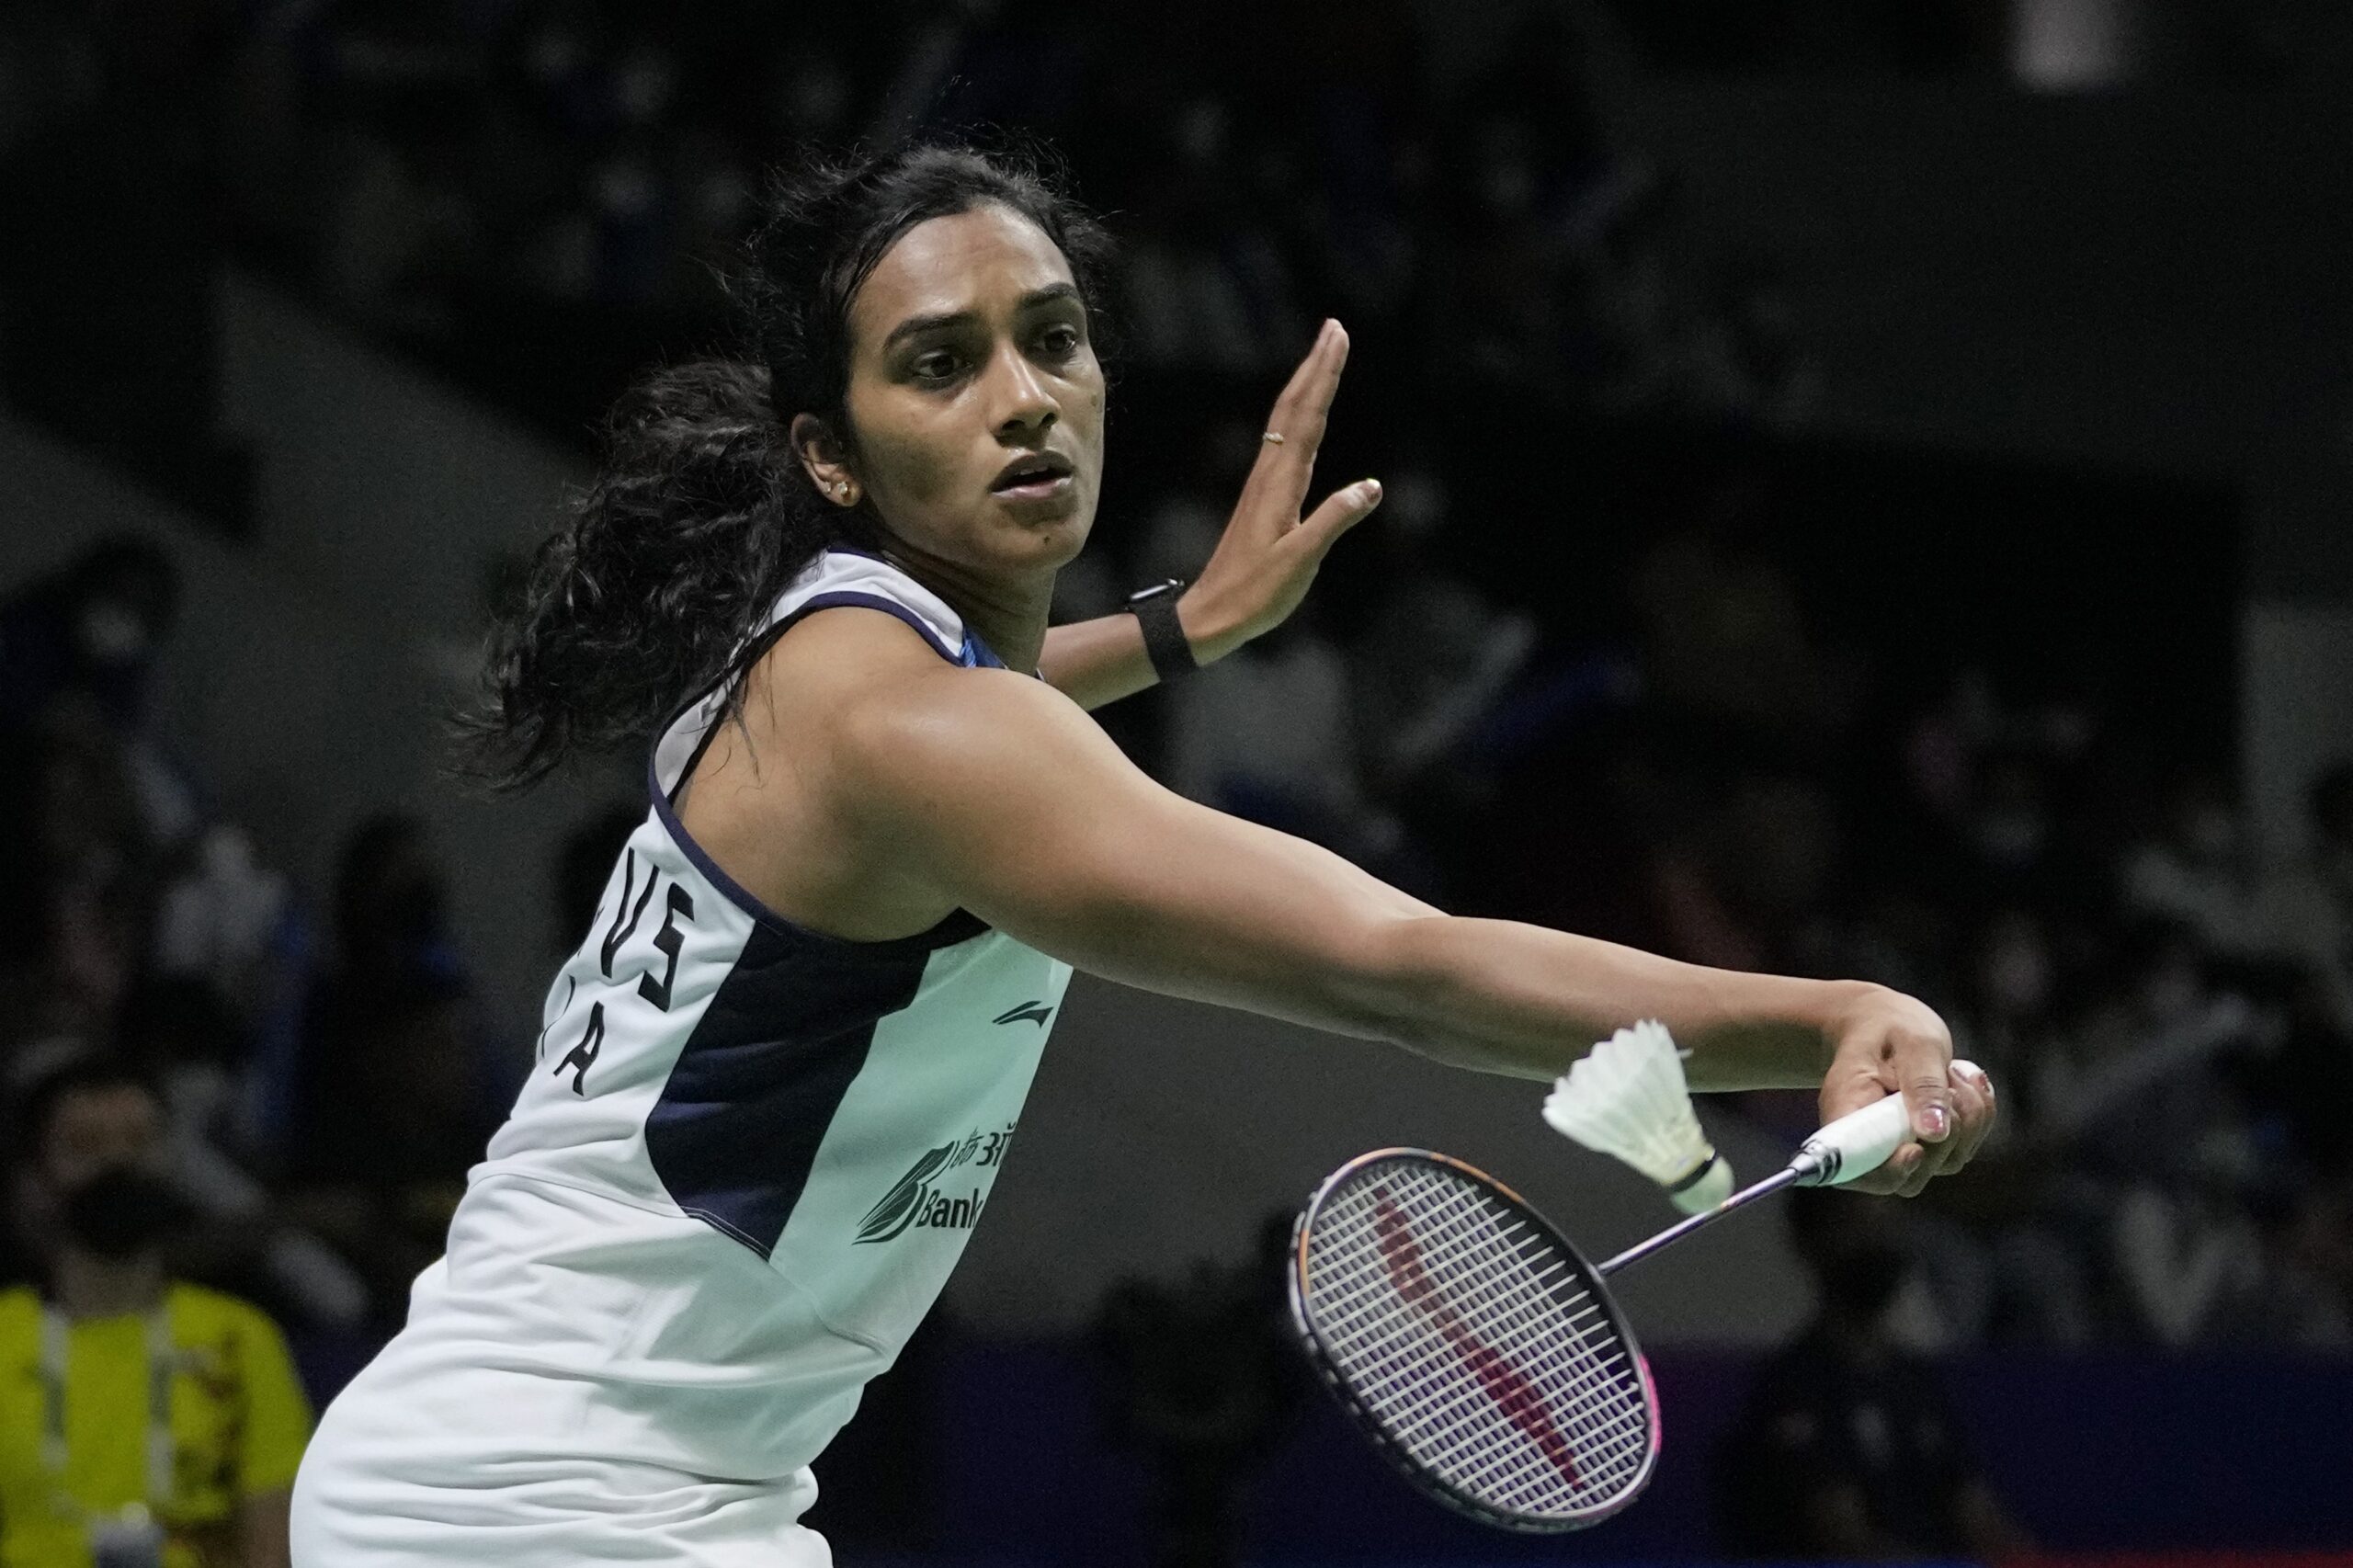 PV Sindhu and HS Prannoy lose in India's Sudirman Cup opener